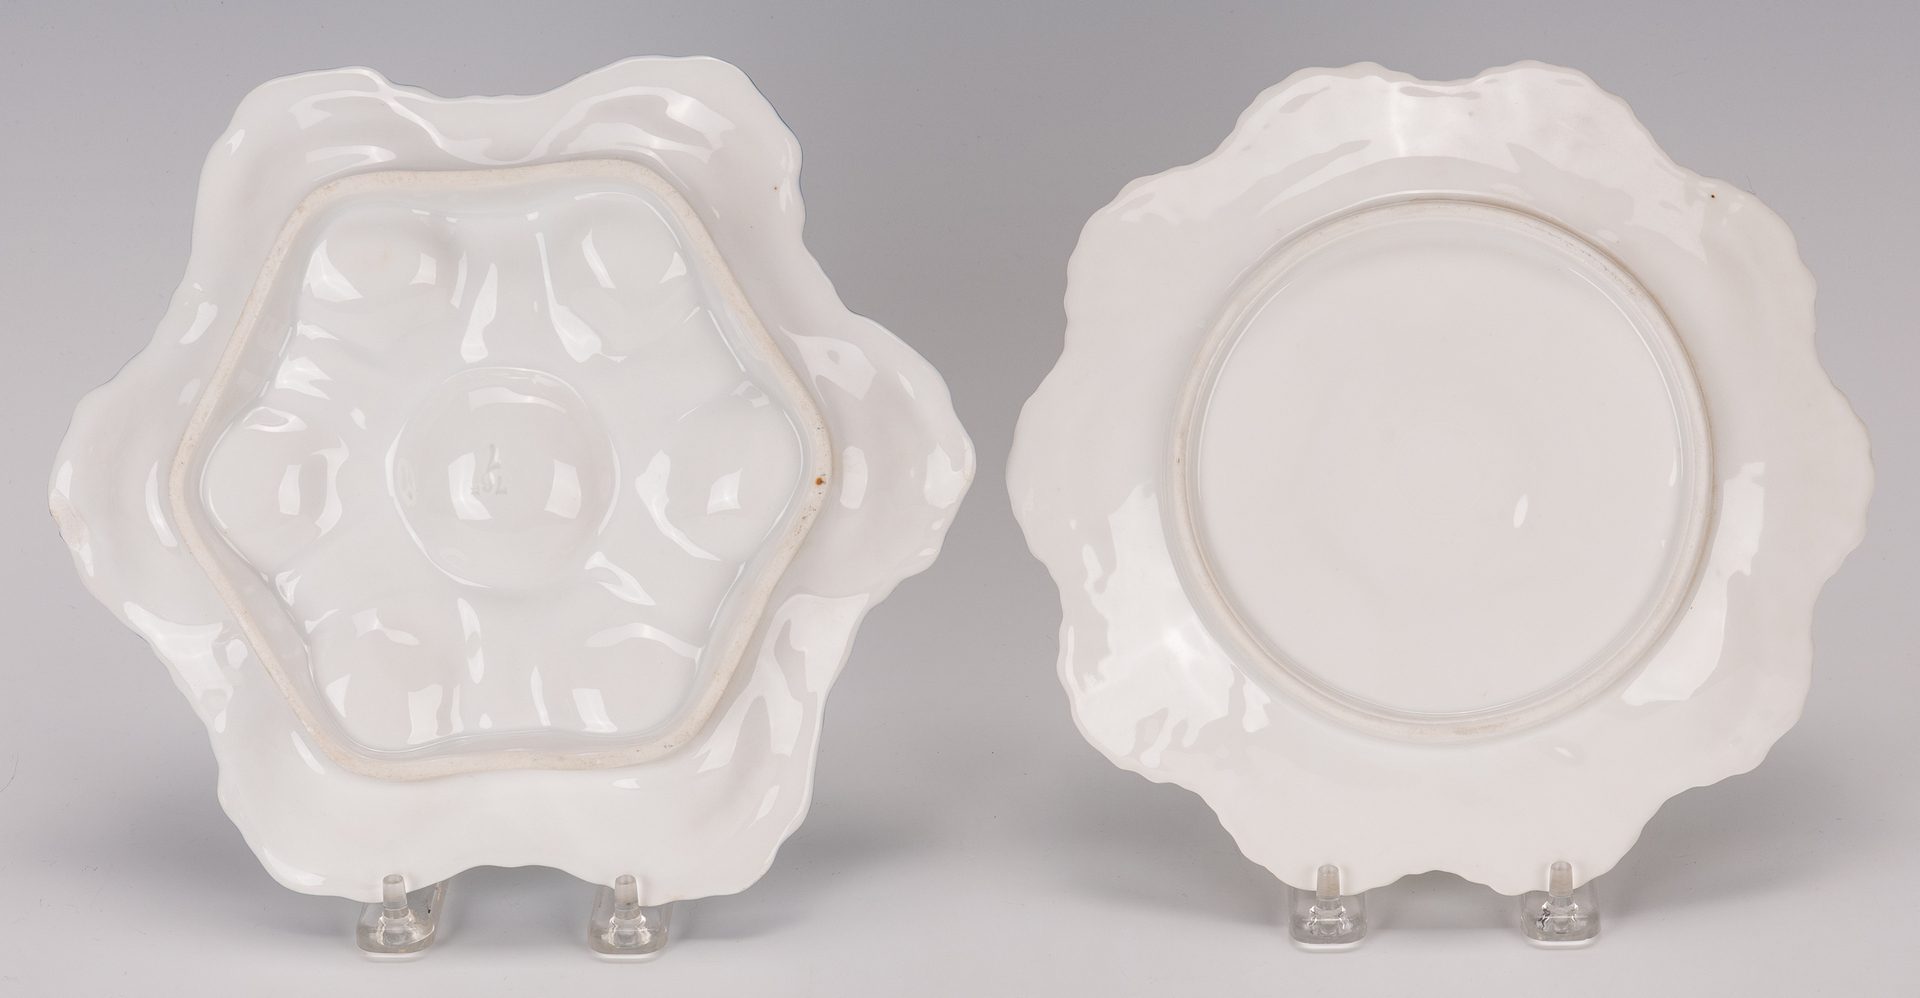 Lot 502: 10 Assorted Oyster Plates, late 19-early 20th c.